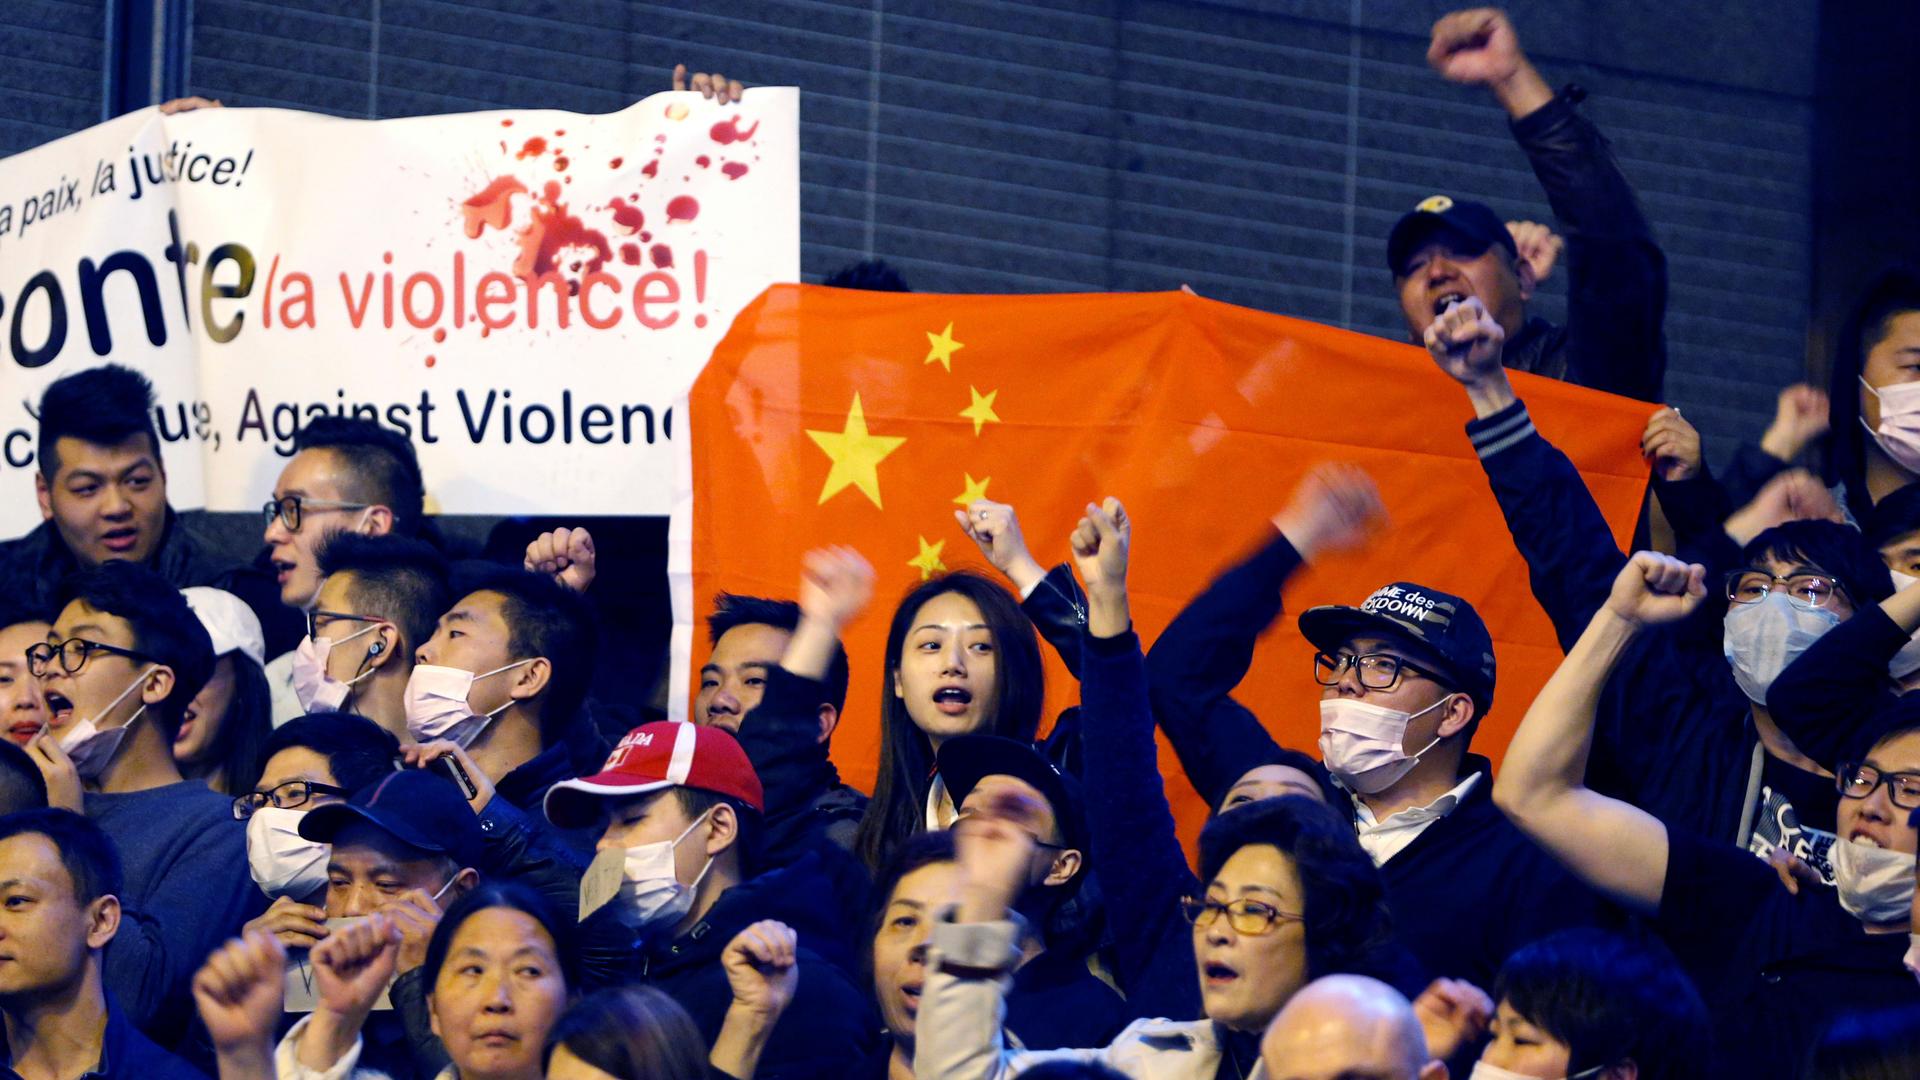 Members of the Chinese community shout slogans during a protest at Place de la Bastille in Paris, France, March 30, 2017.